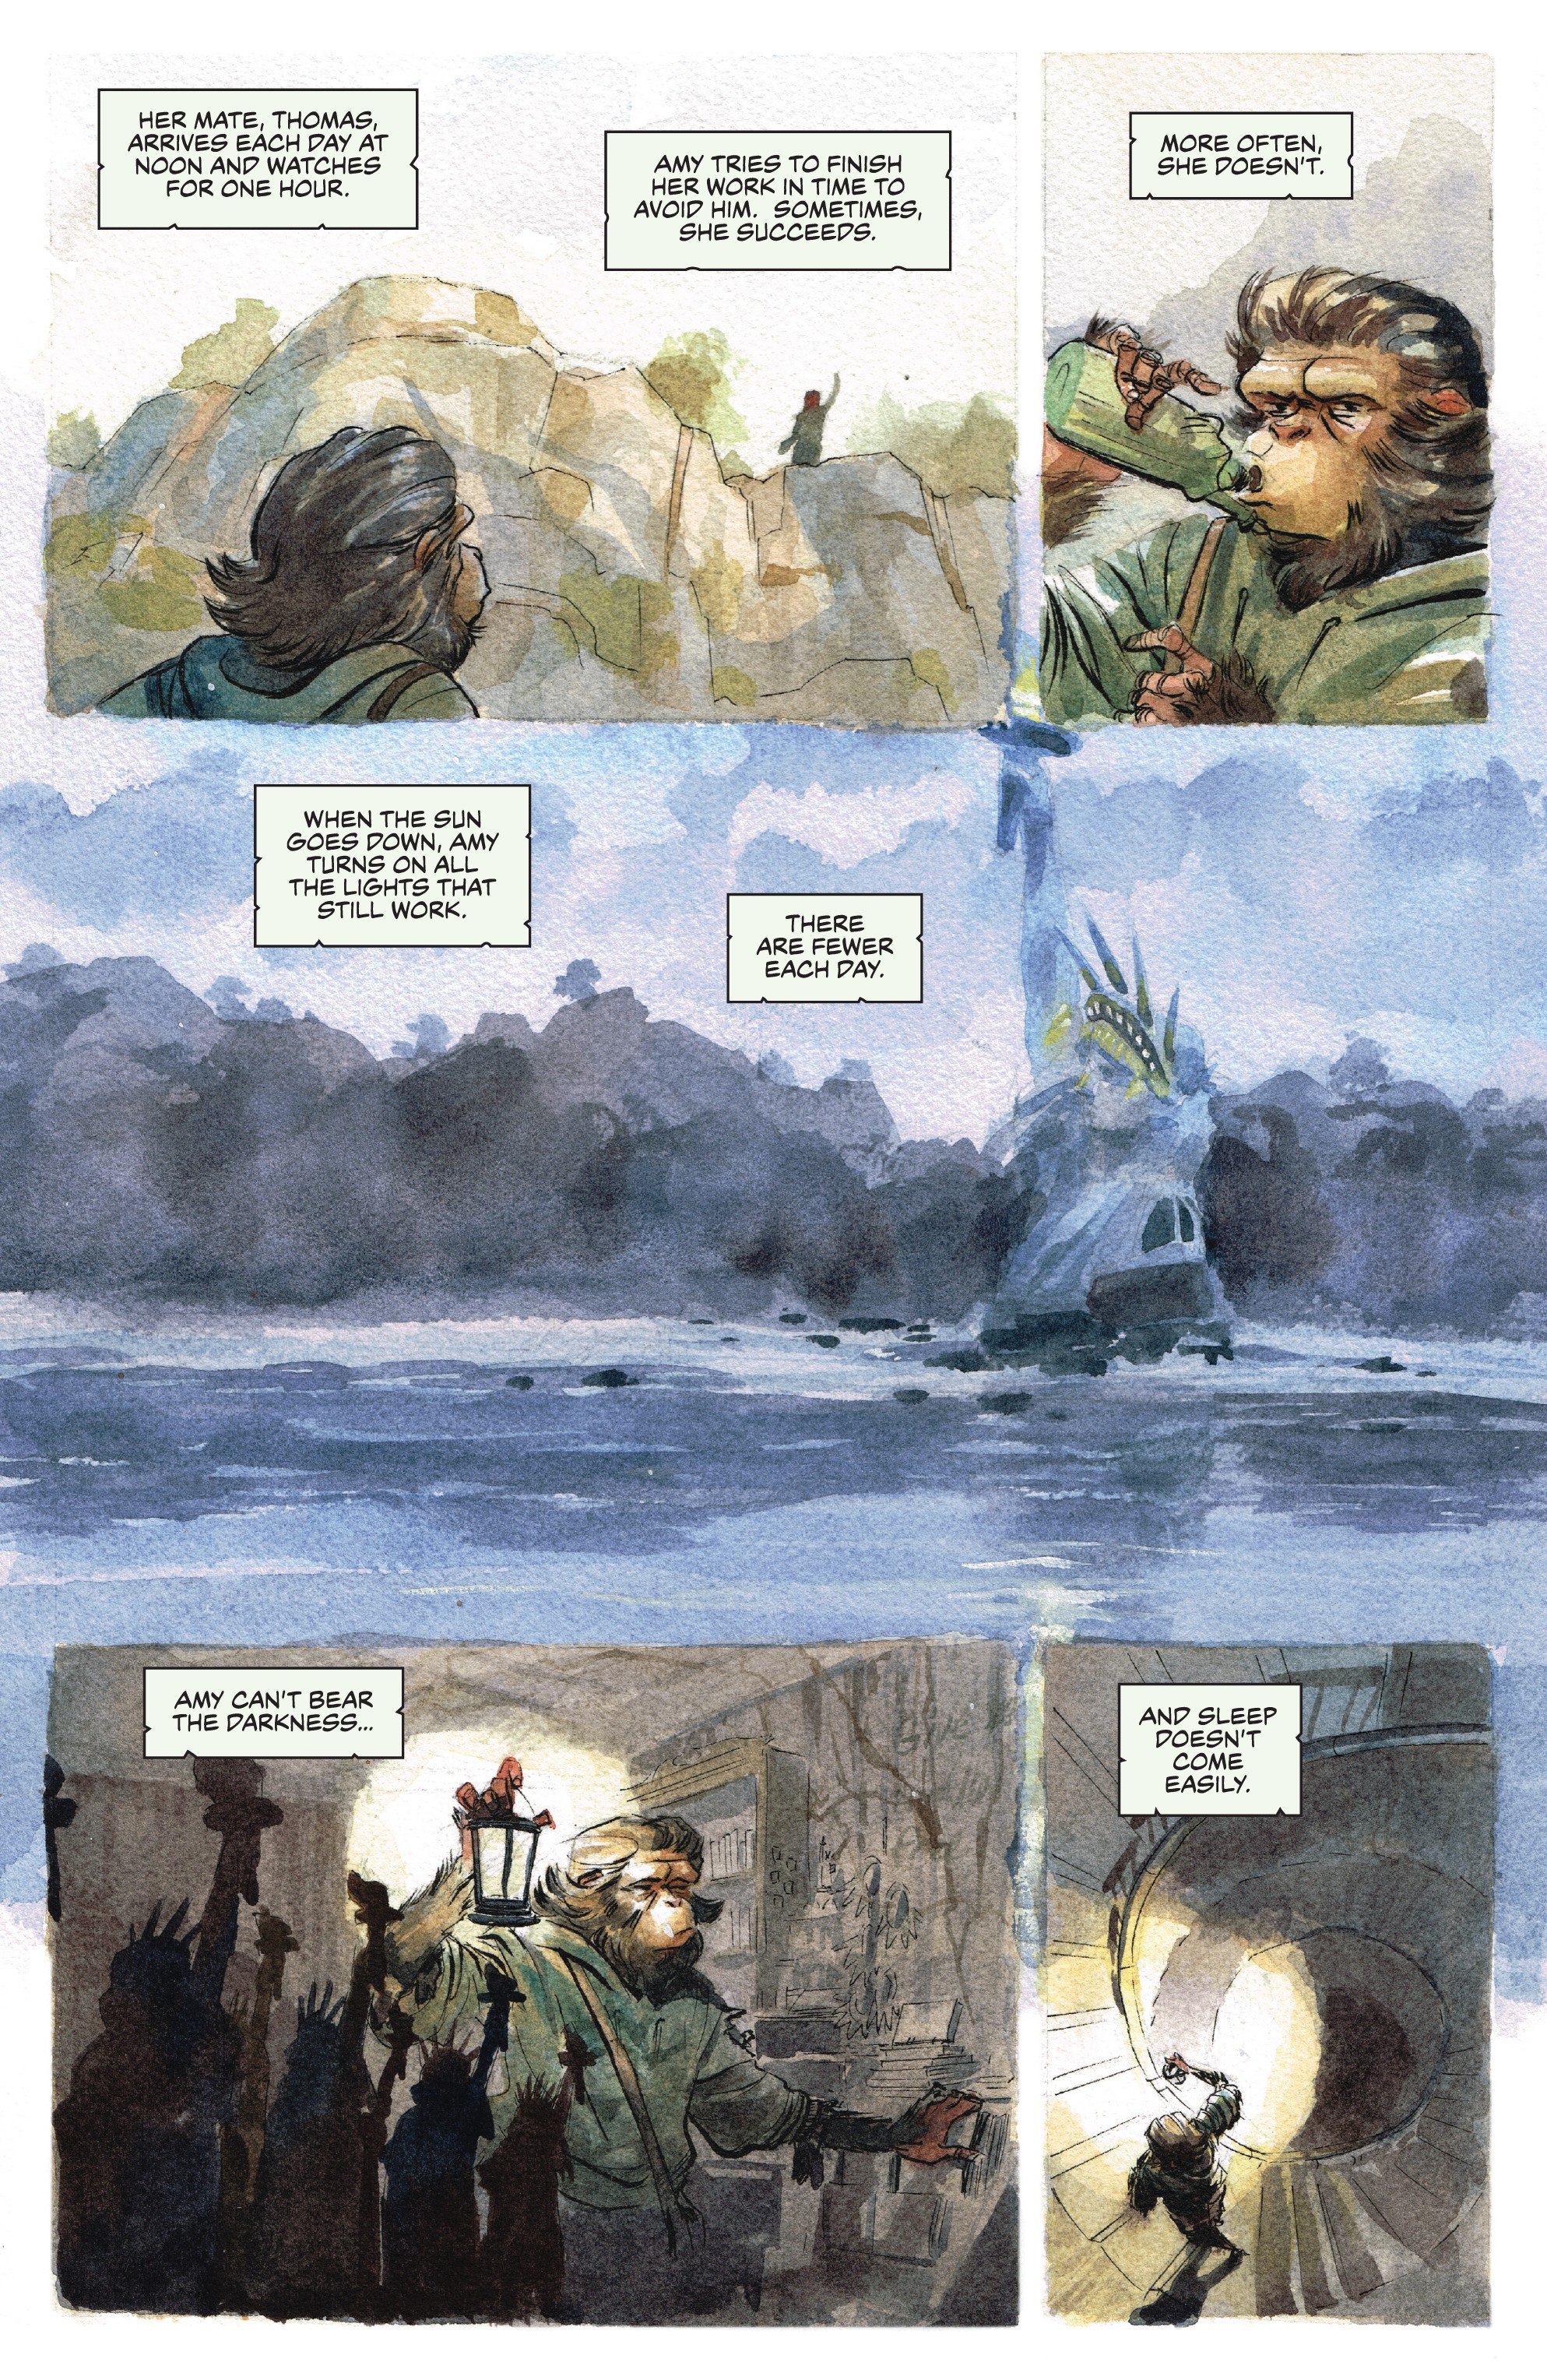 Planet of the Apes: The Simian Age (2018-): Chapter 1 - Page 4